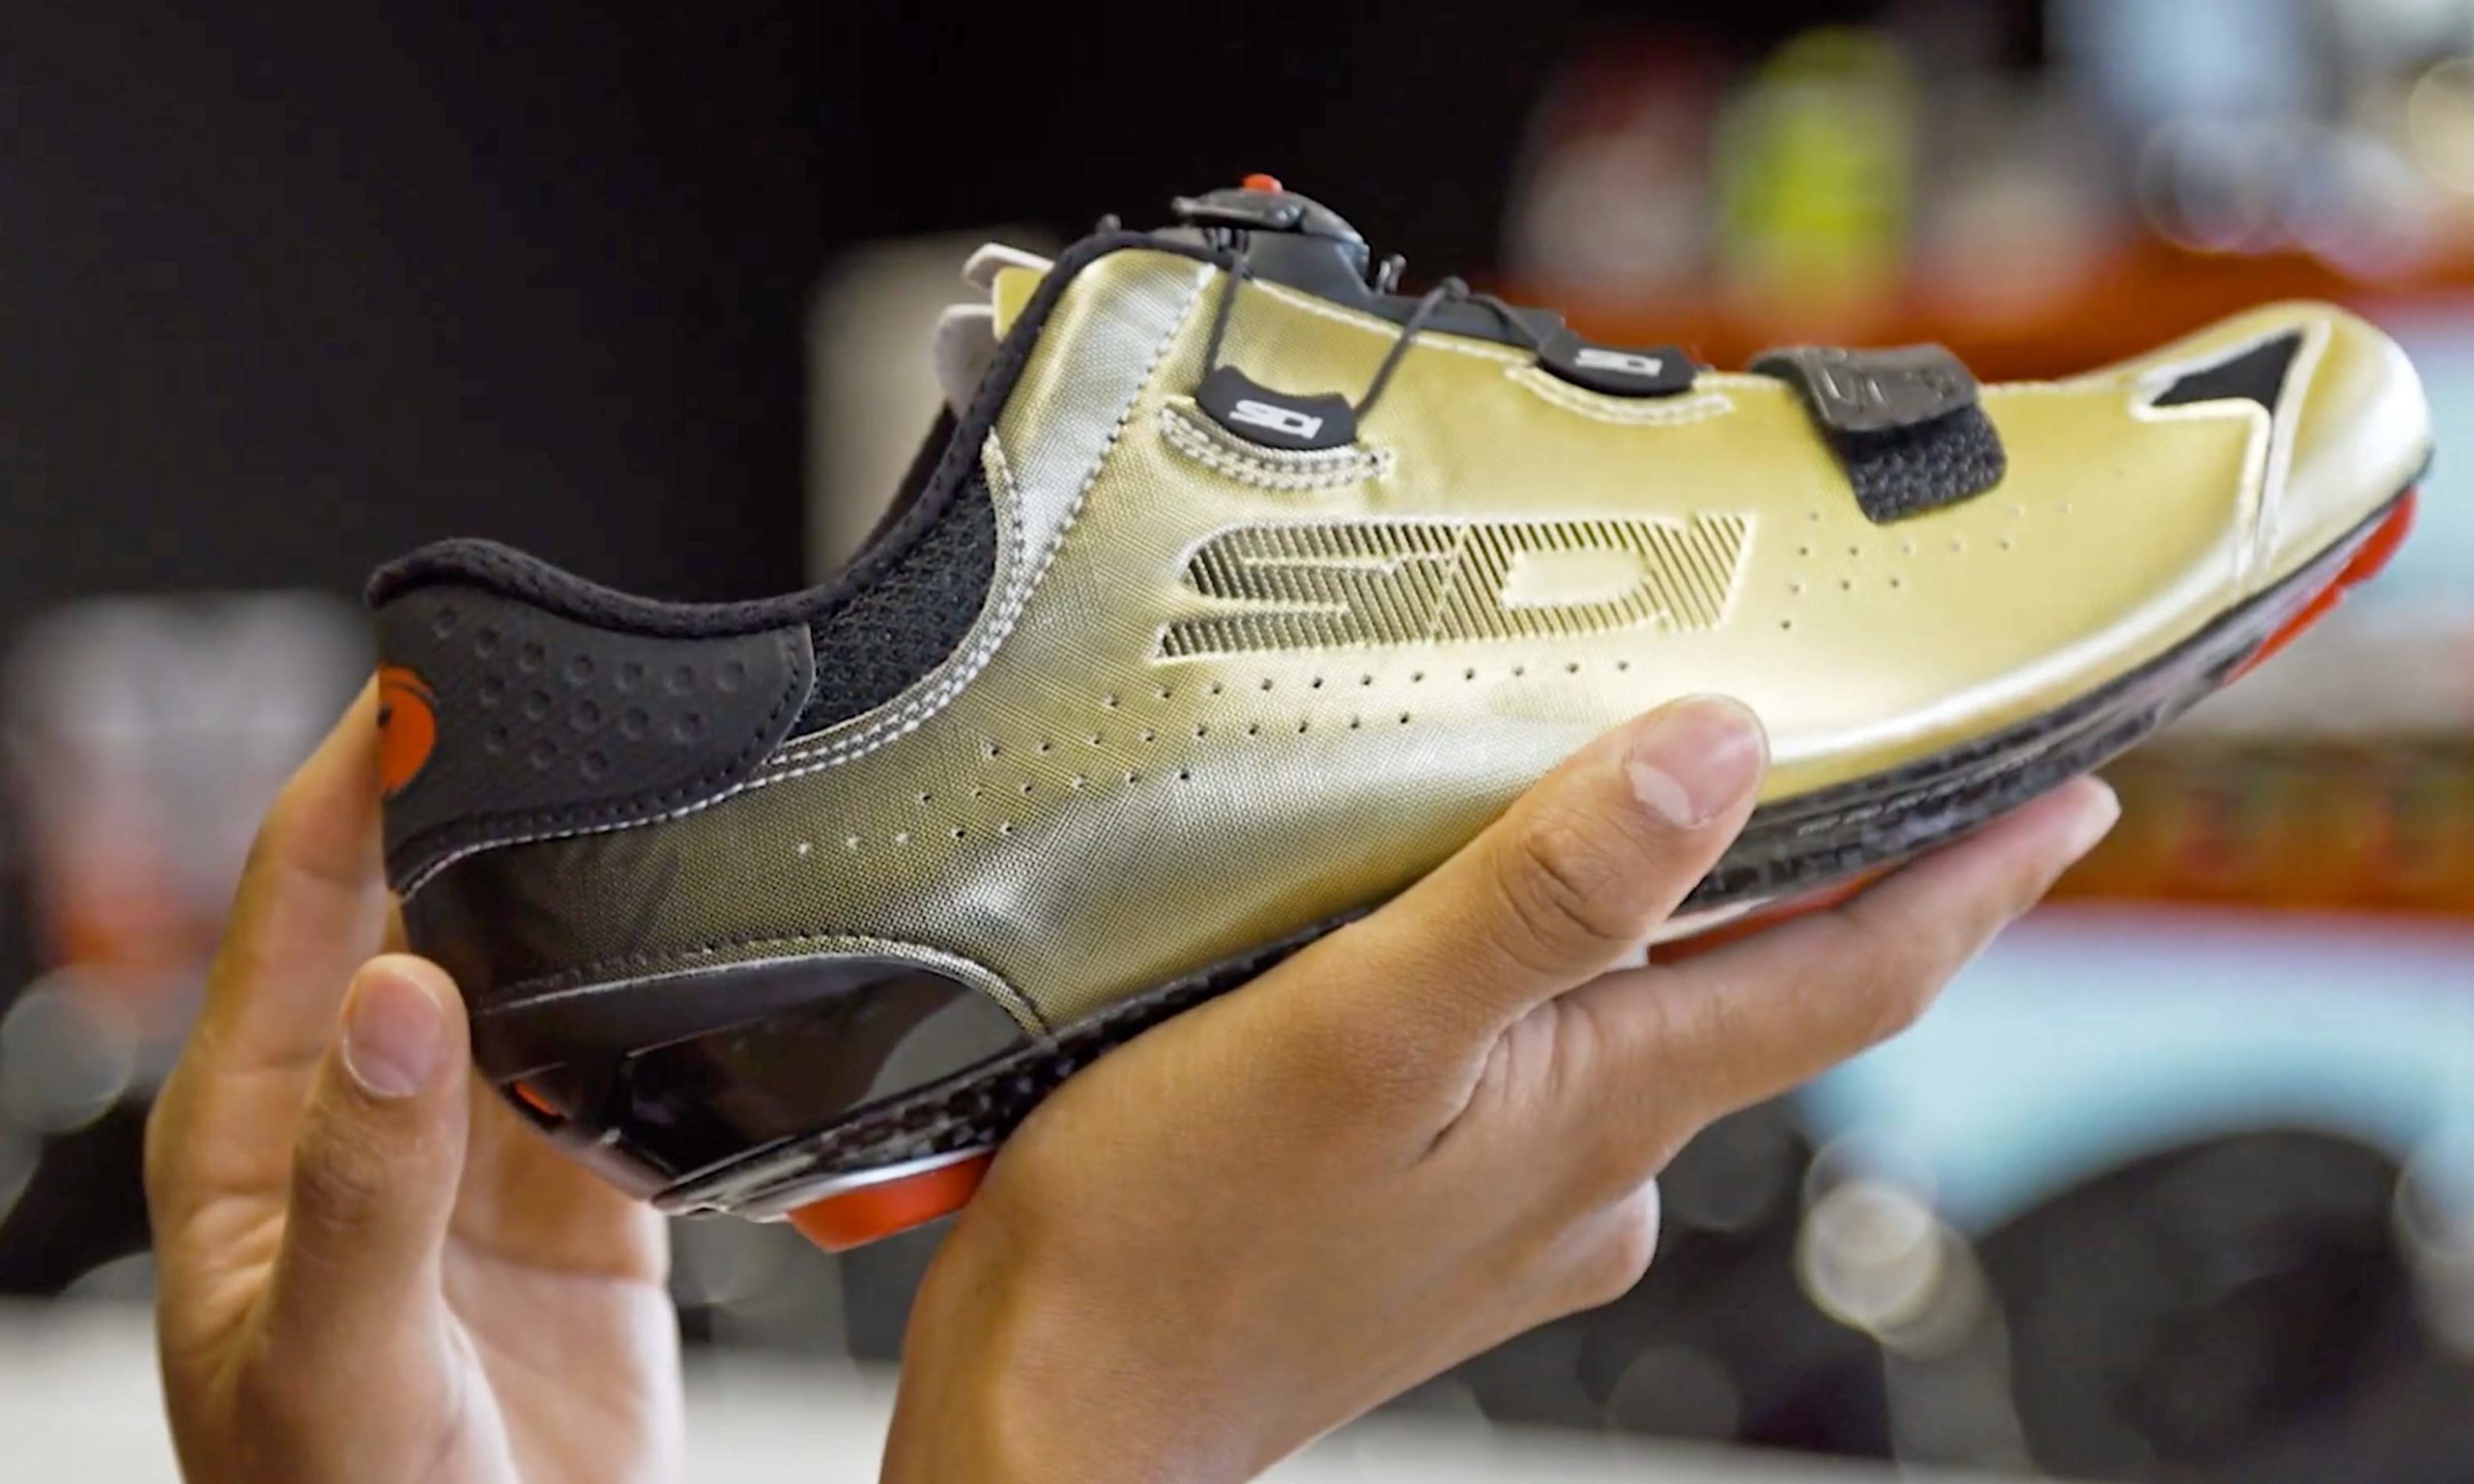 Sidi Sixty Gold shines even more, now in limited edition gilded